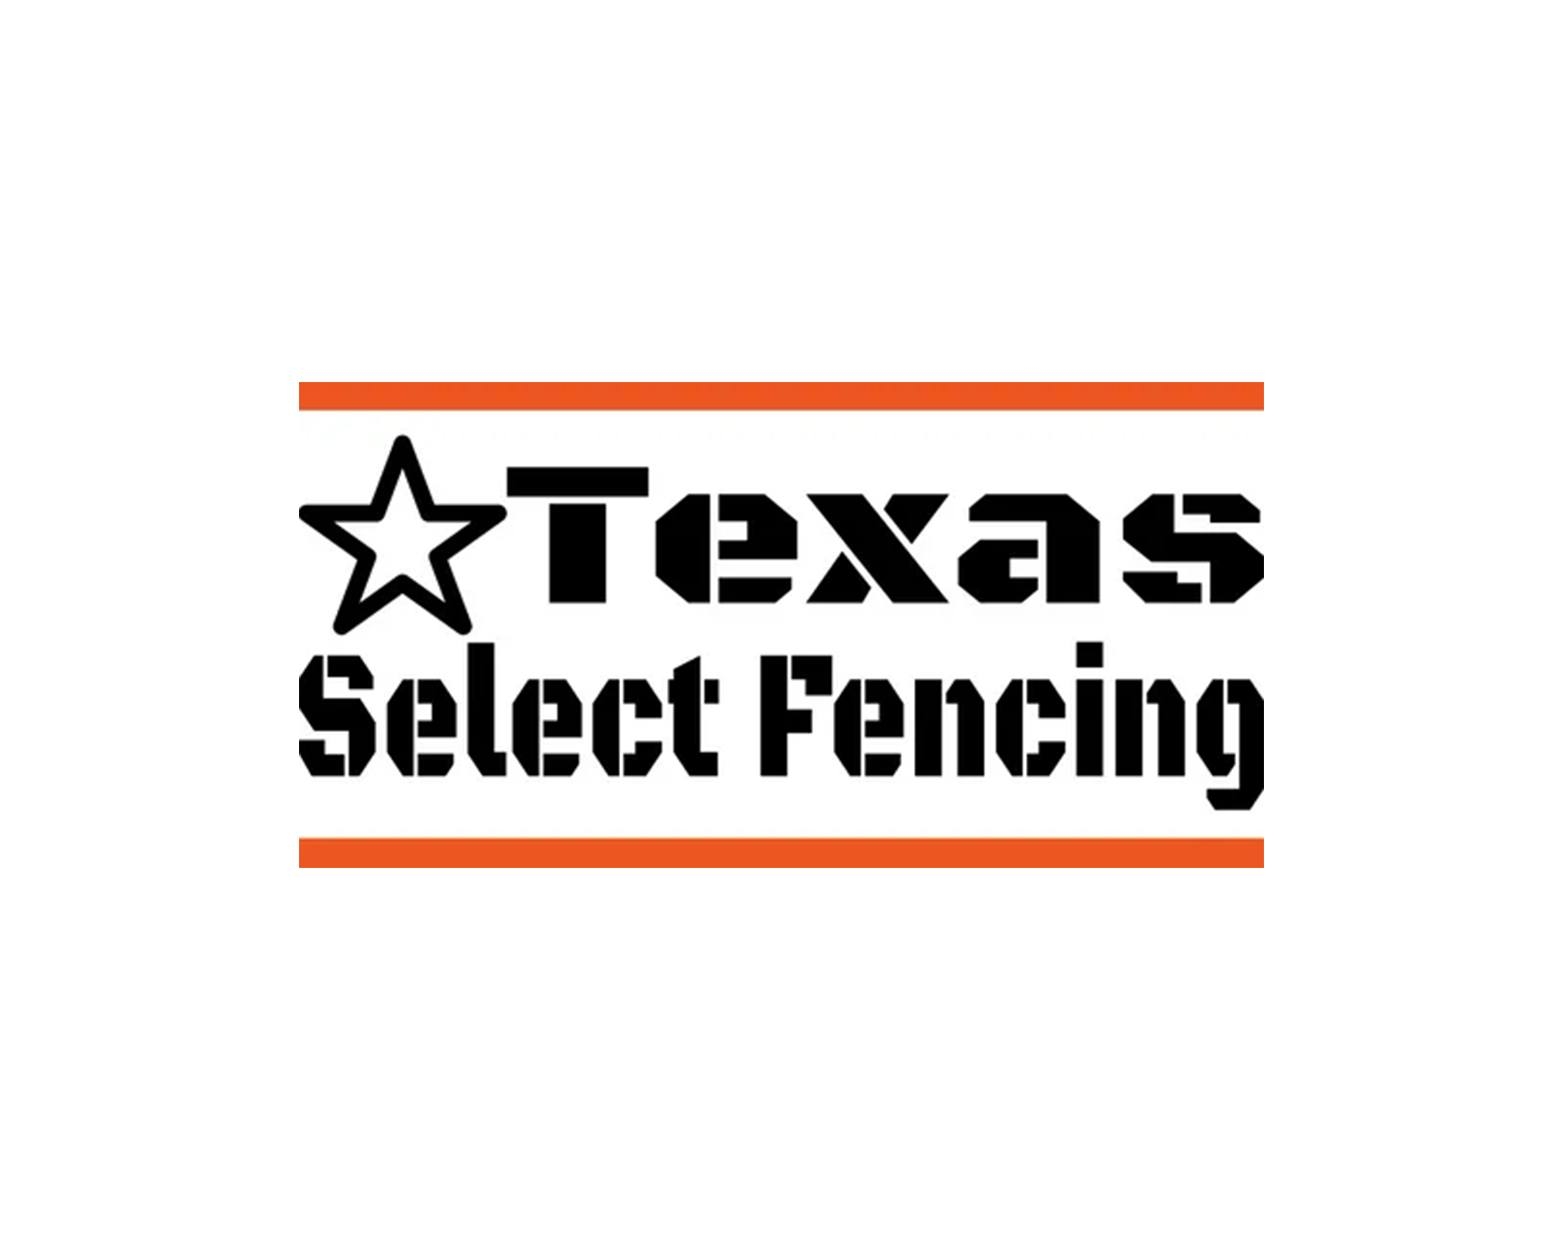 Texas Select Fencing Celebrates First Year in Business